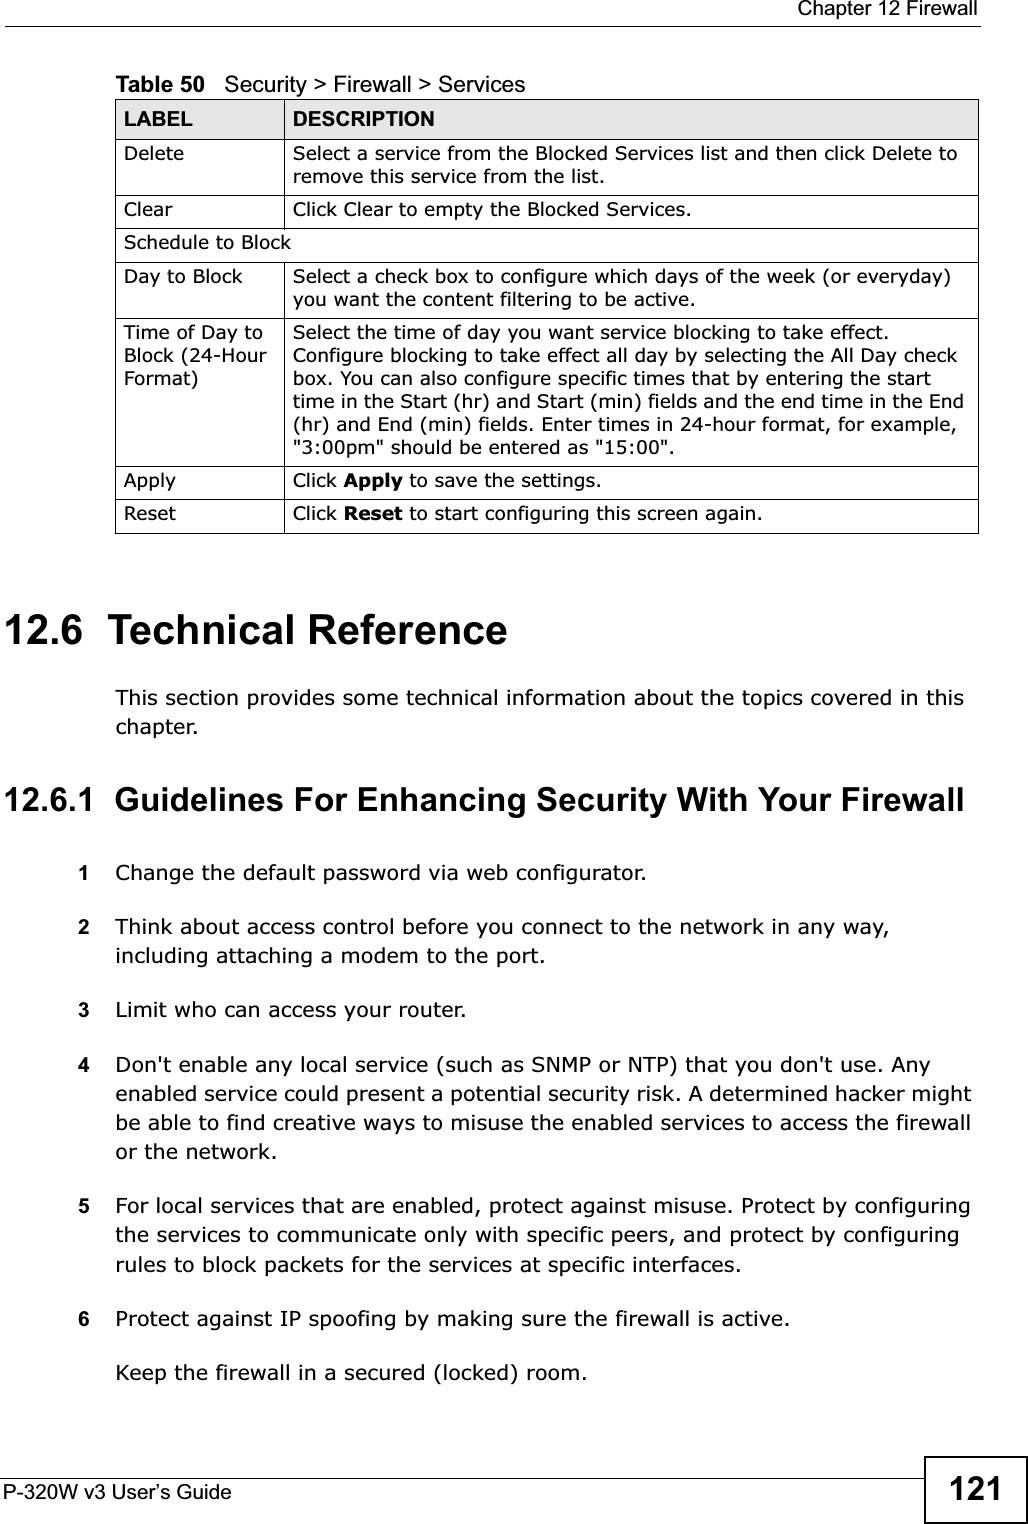  Chapter 12 FirewallP-320W v3 User’s Guide 12112.6  Technical ReferenceThis section provides some technical information about the topics covered in this chapter.12.6.1  Guidelines For Enhancing Security With Your Firewall1Change the default password via web configurator. 2Think about access control before you connect to the network in any way, including attaching a modem to the port. 3Limit who can access your router. 4Don&apos;t enable any local service (such as SNMP or NTP) that you don&apos;t use. Any enabled service could present a potential security risk. A determined hacker might be able to find creative ways to misuse the enabled services to access the firewall or the network. 5For local services that are enabled, protect against misuse. Protect by configuring the services to communicate only with specific peers, and protect by configuring rules to block packets for the services at specific interfaces. 6Protect against IP spoofing by making sure the firewall is active. Keep the firewall in a secured (locked) room. Delete Select a service from the Blocked Services list and then click Delete to remove this service from the list.Clear Click Clear to empty the Blocked Services.Schedule to BlockDay to Block Select a check box to configure which days of the week (or everyday) you want the content filtering to be active.Time of Day to Block (24-Hour Format)Select the time of day you want service blocking to take effect. Configure blocking to take effect all day by selecting the All Day check box. You can also configure specific times that by entering the start time in the Start (hr) and Start (min) fields and the end time in the End (hr) and End (min) fields. Enter times in 24-hour format, for example, &quot;3:00pm&quot; should be entered as &quot;15:00&quot;.Apply Click Apply to save the settings. Reset Click Reset to start configuring this screen again. Table 50   Security &gt; Firewall &gt; ServicesLABEL DESCRIPTION